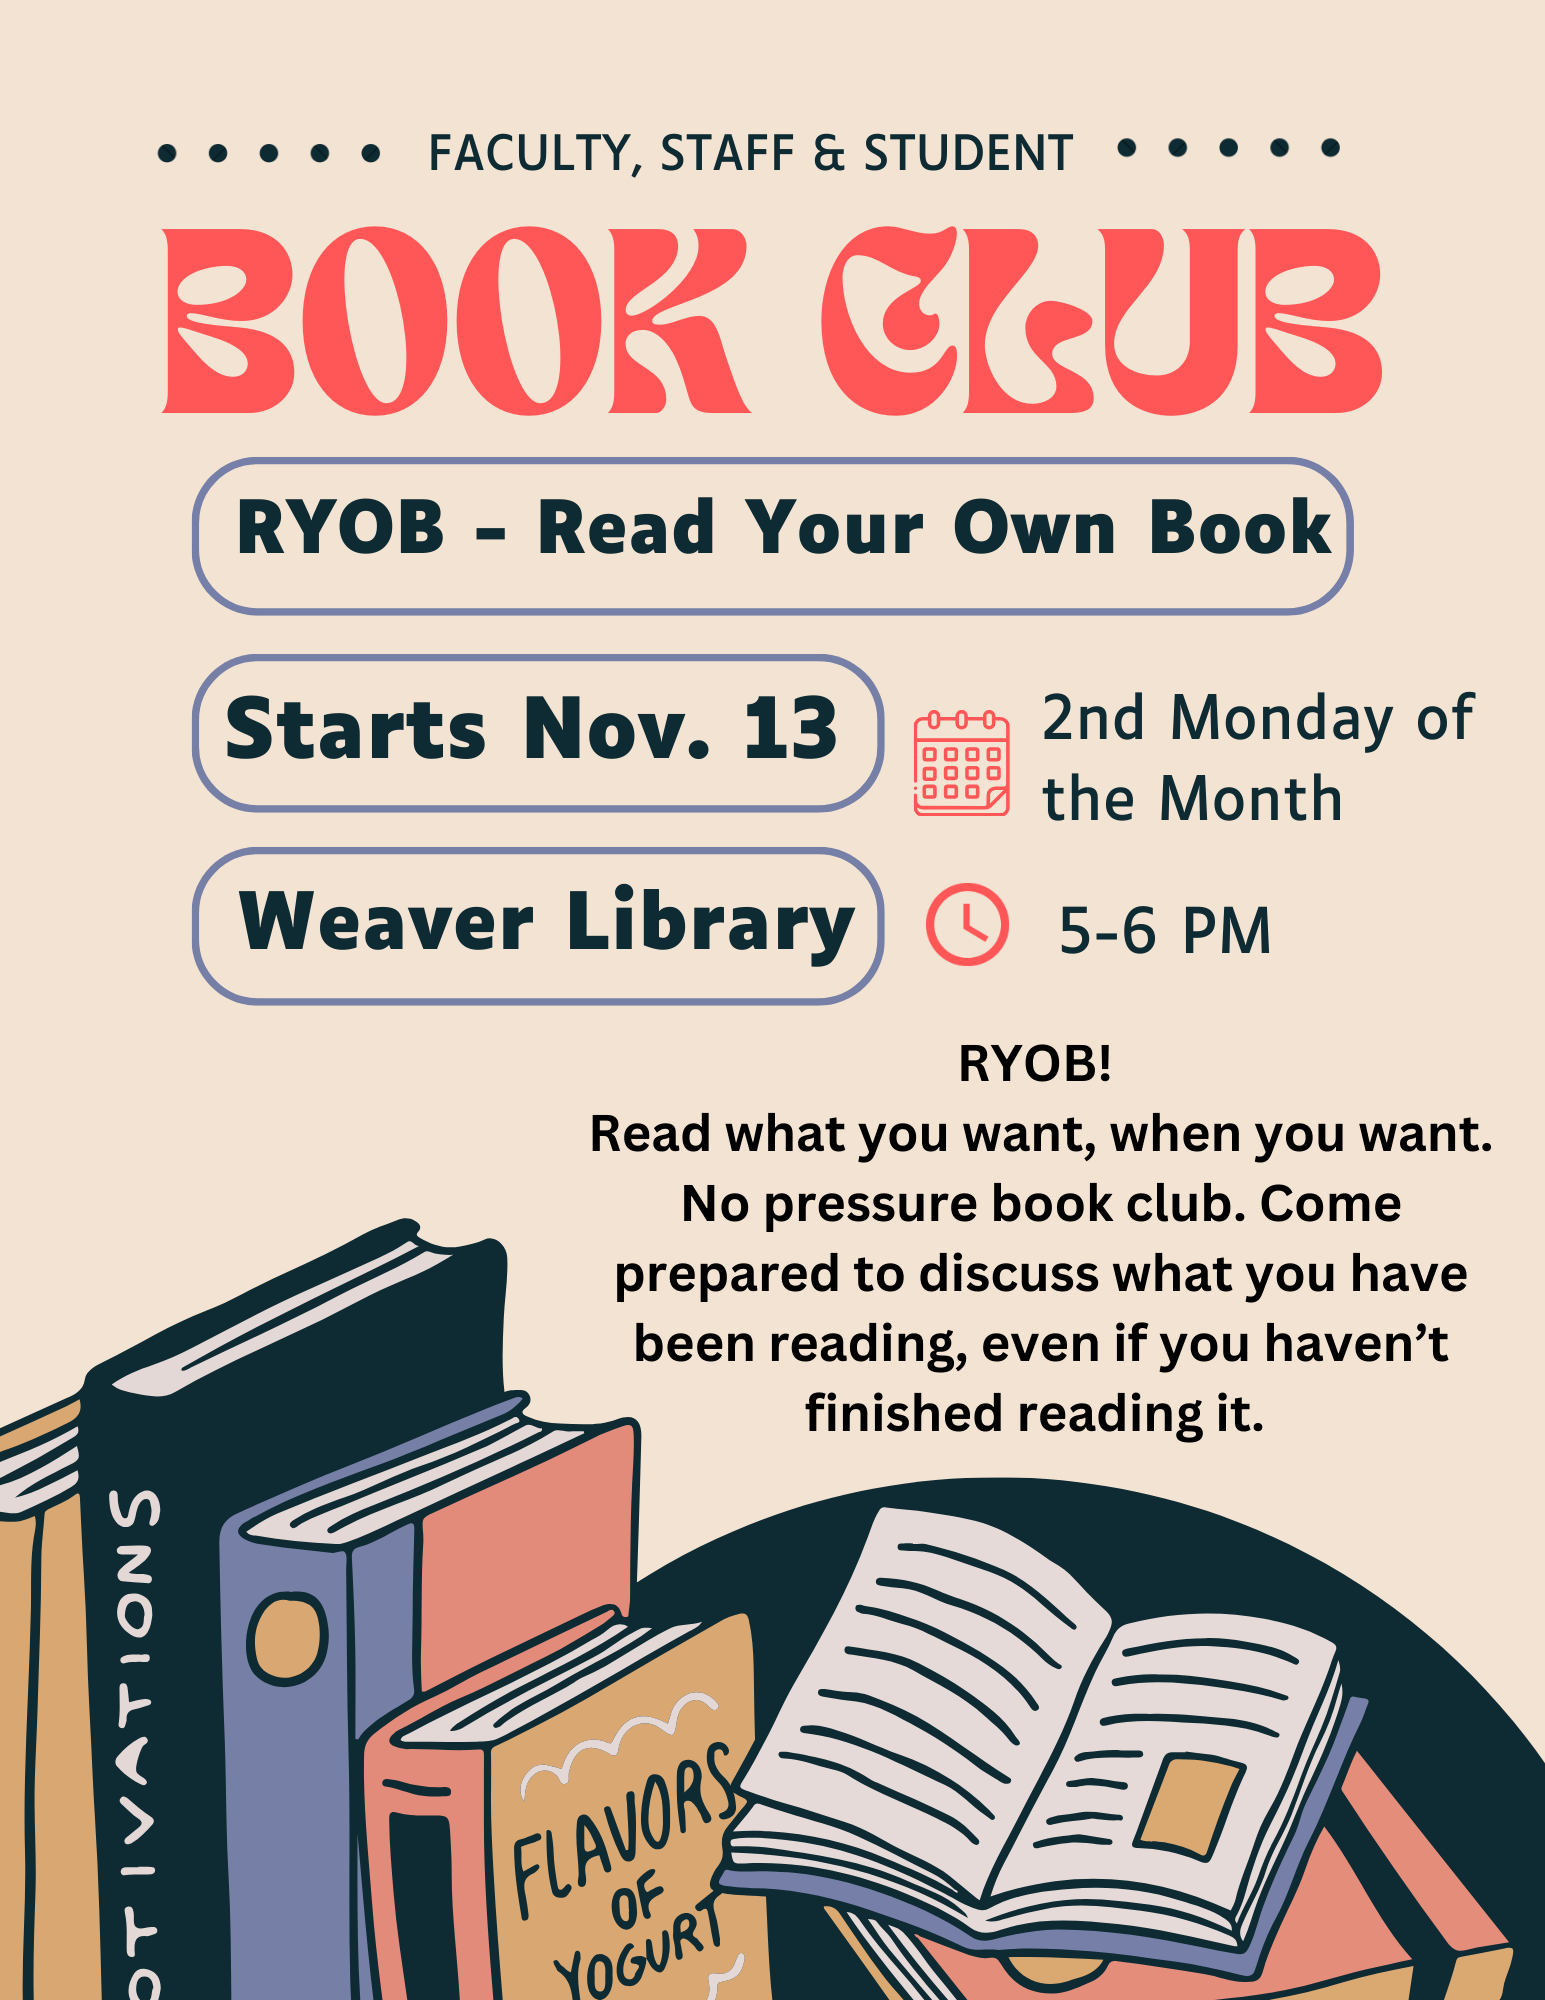 poster decorated with book graphics, announcing the faculty, staff & student book club. RYOB - Read Your Own Book. Starts Nov. 13. Weaver Library. Every 2nd Monday of the month, 5-6 PM. RYOB! Read what you want when you want. No pressure book club. Come prepared to discuss what you have been reading, even if you haven't finished reading it. 